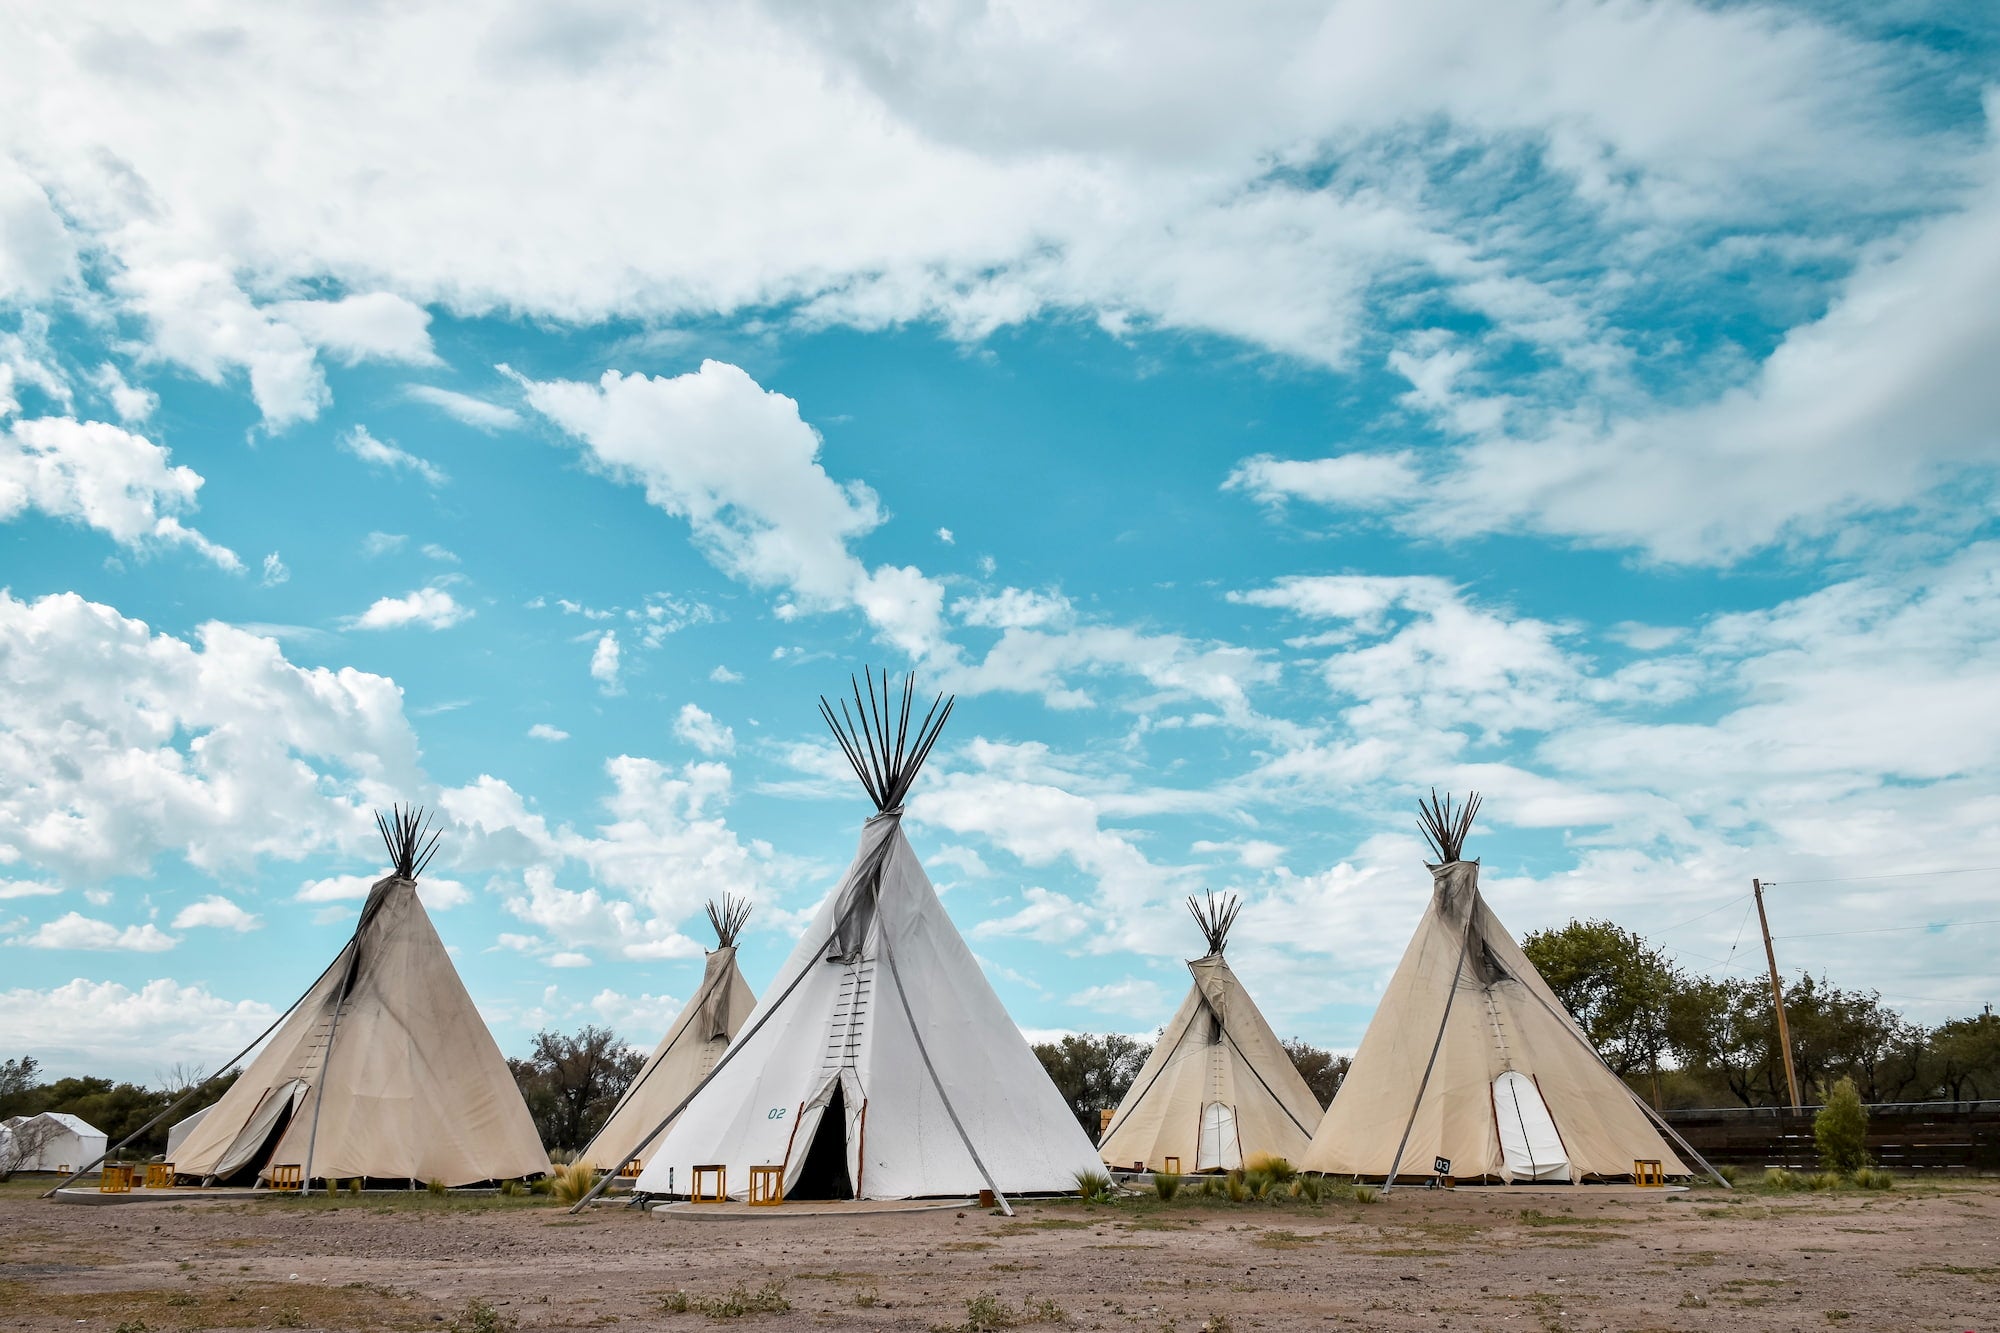 Glamping teepees at El Cosmico in Marfa.